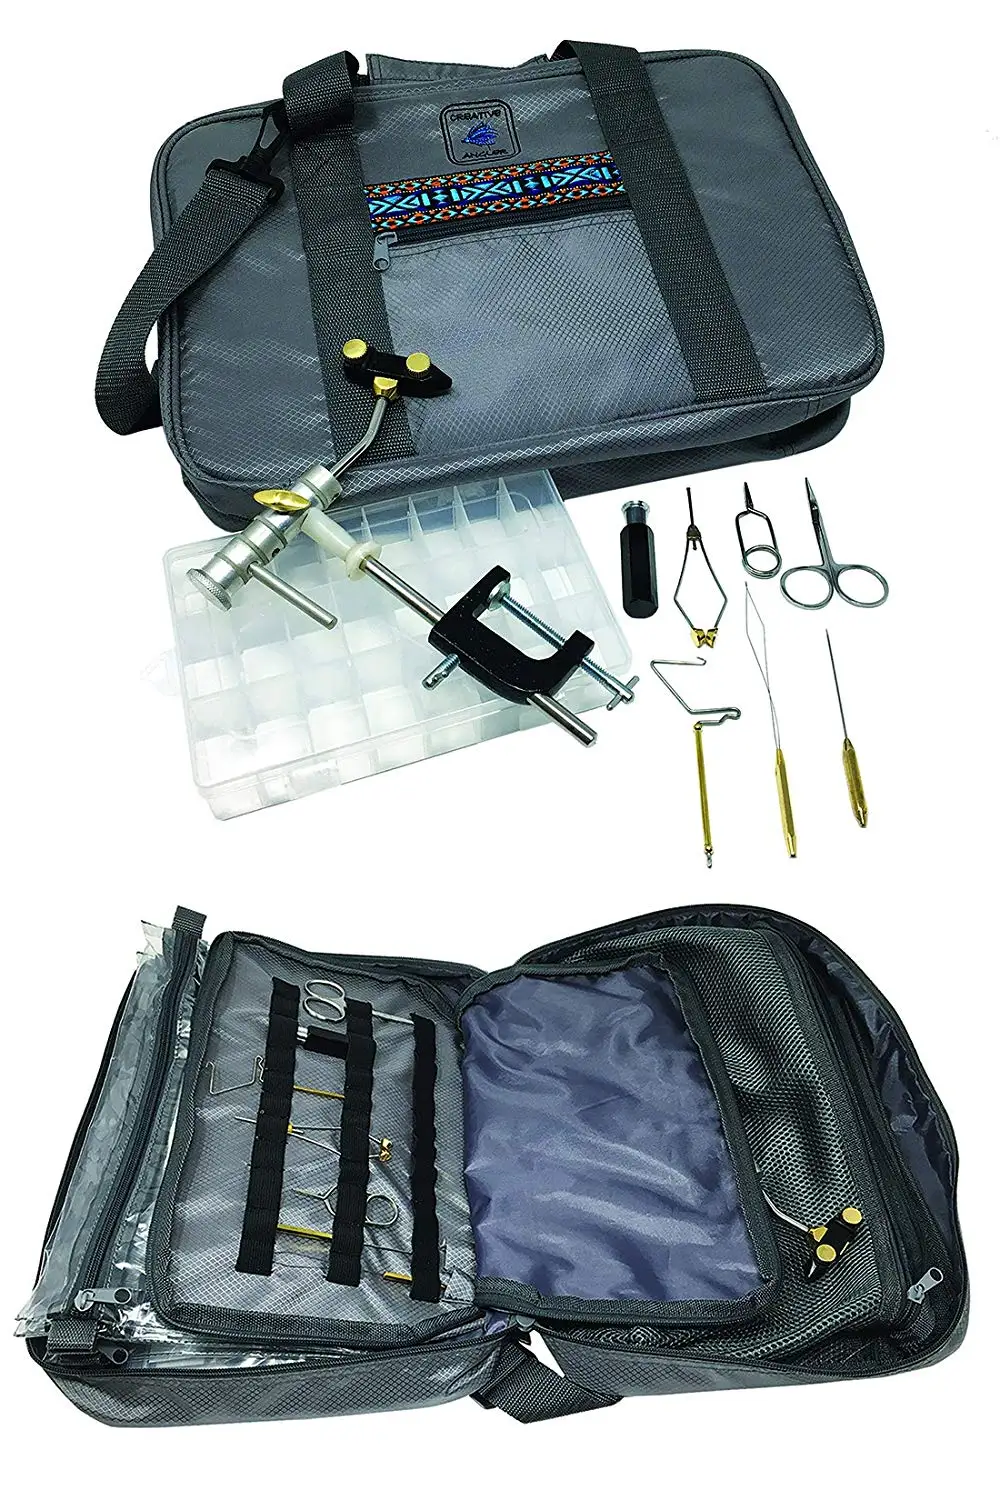 Creative Angler Ultimate Fly Tying Kit for Tying Flies or Fly Tying